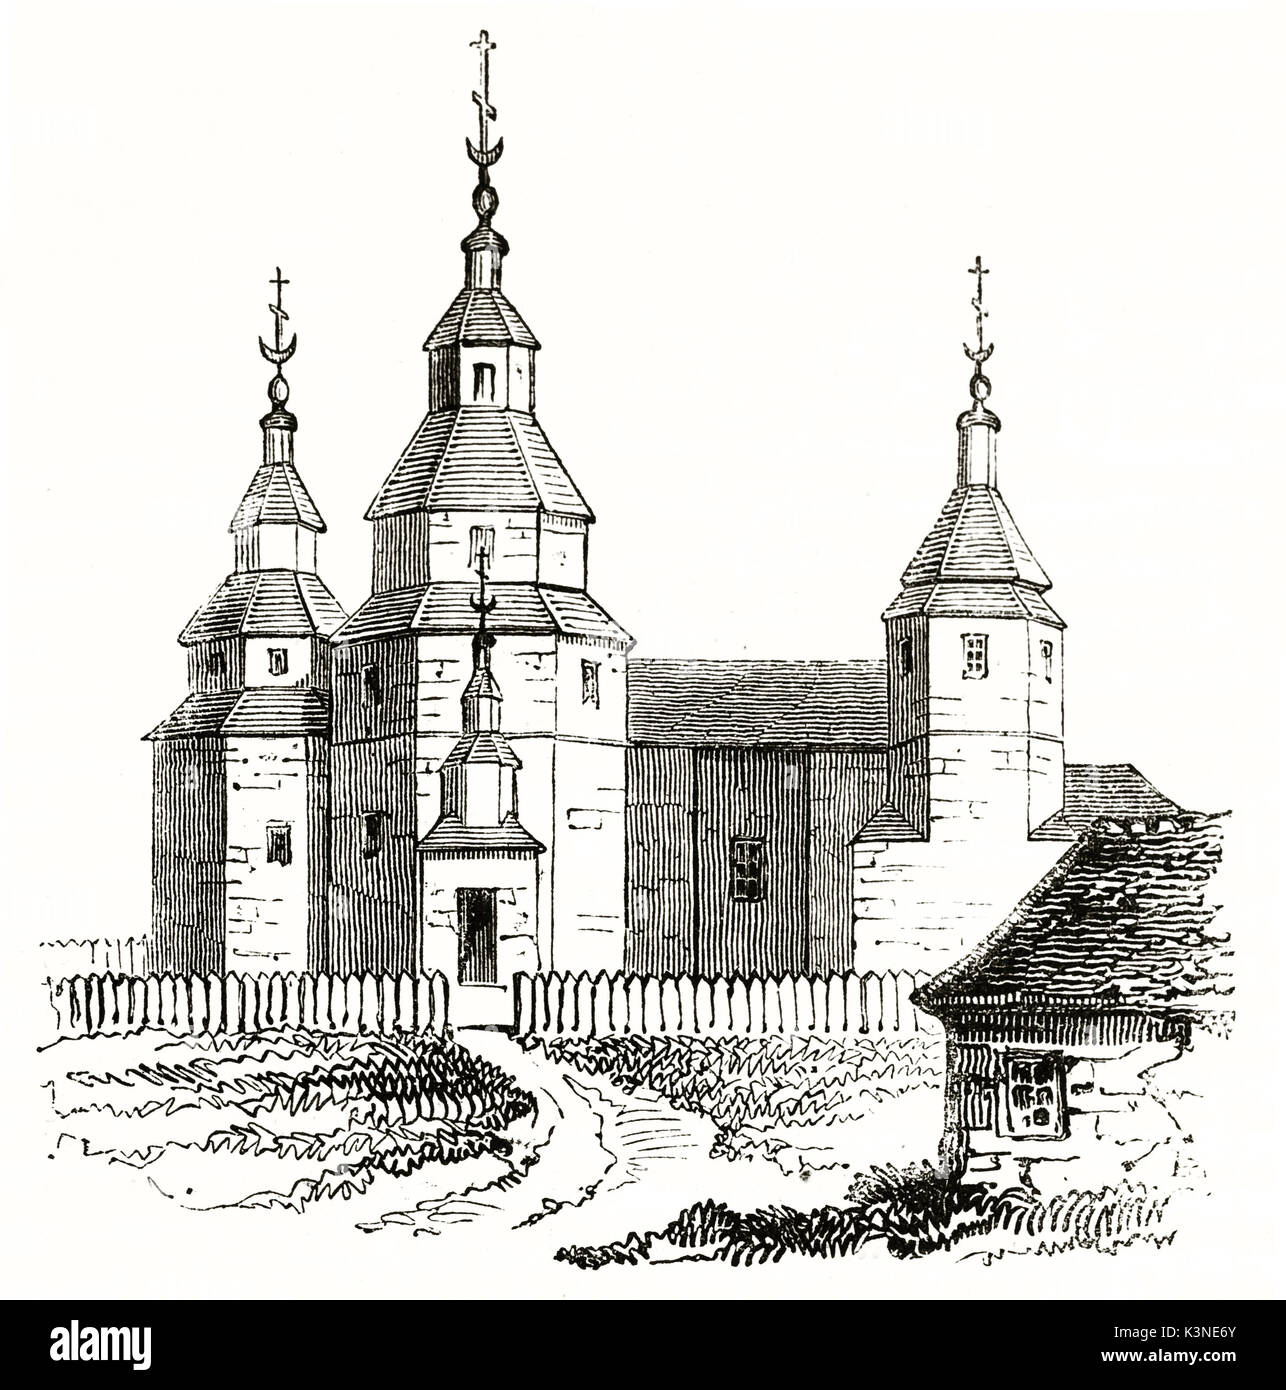 Old view of a Cossack church (muscovite architecture) on white background with a little part of countryside. By unidentified author published on Magasin Pittoresque Paris 1839 Stock Photo